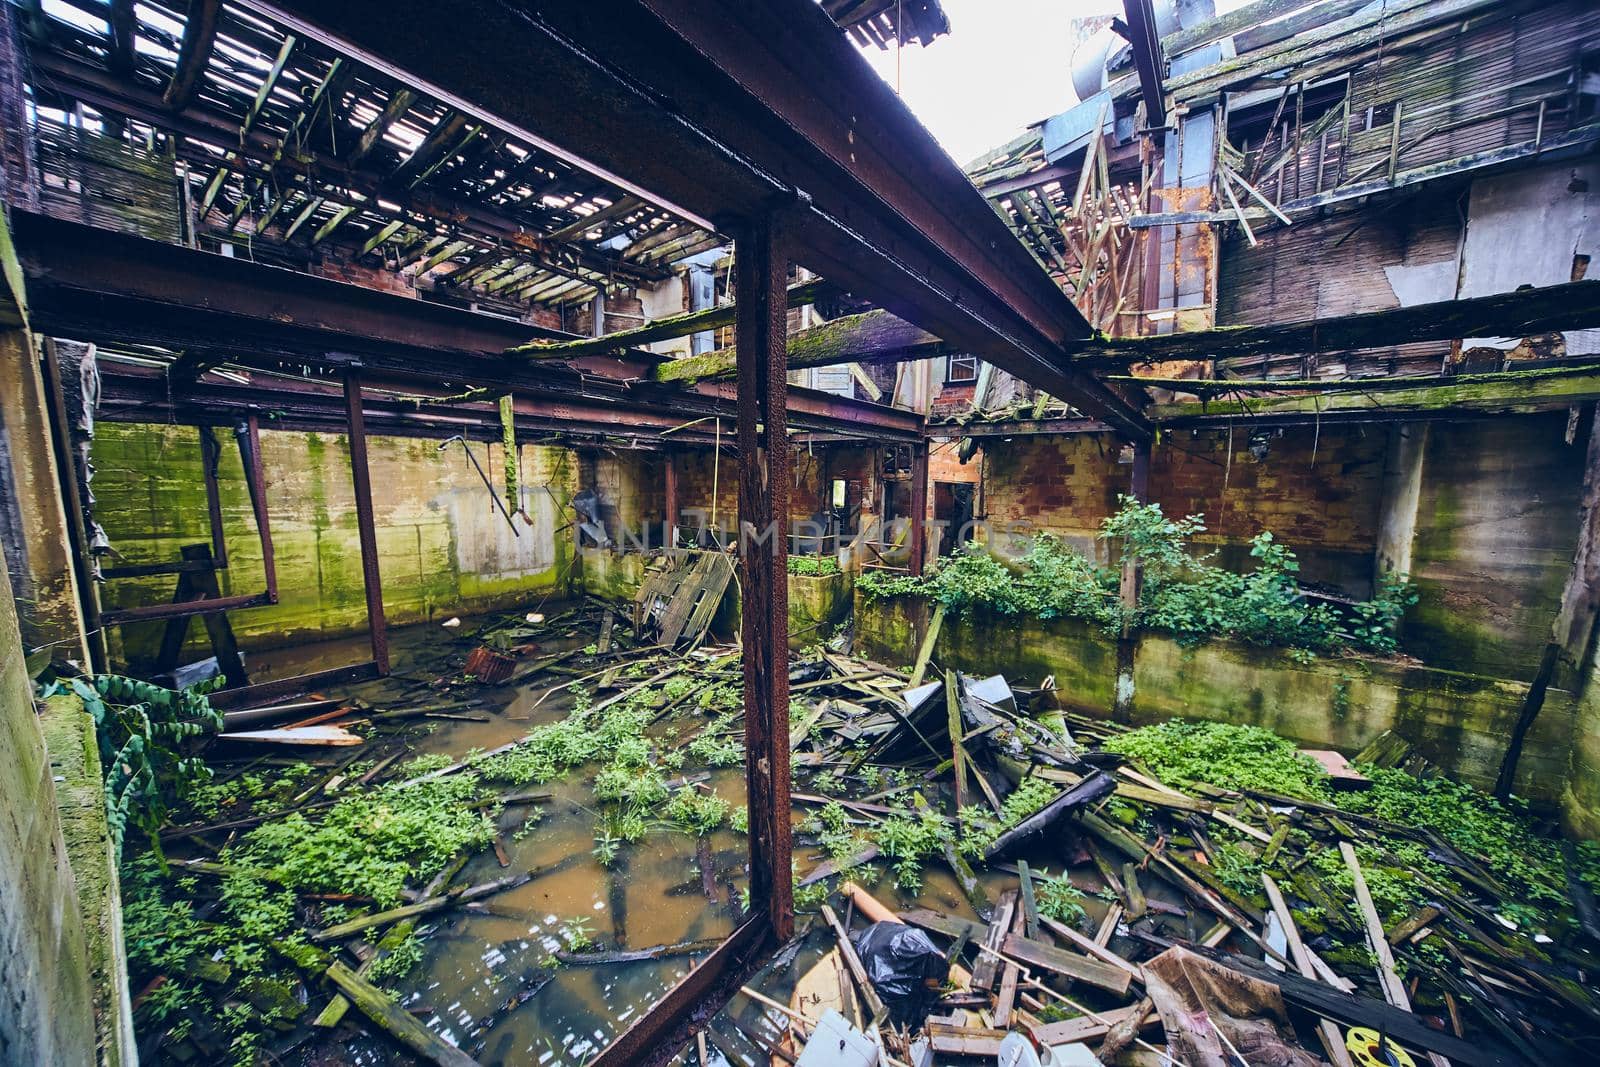 Image of Inside large abandoned building with flooding and collapsed floors